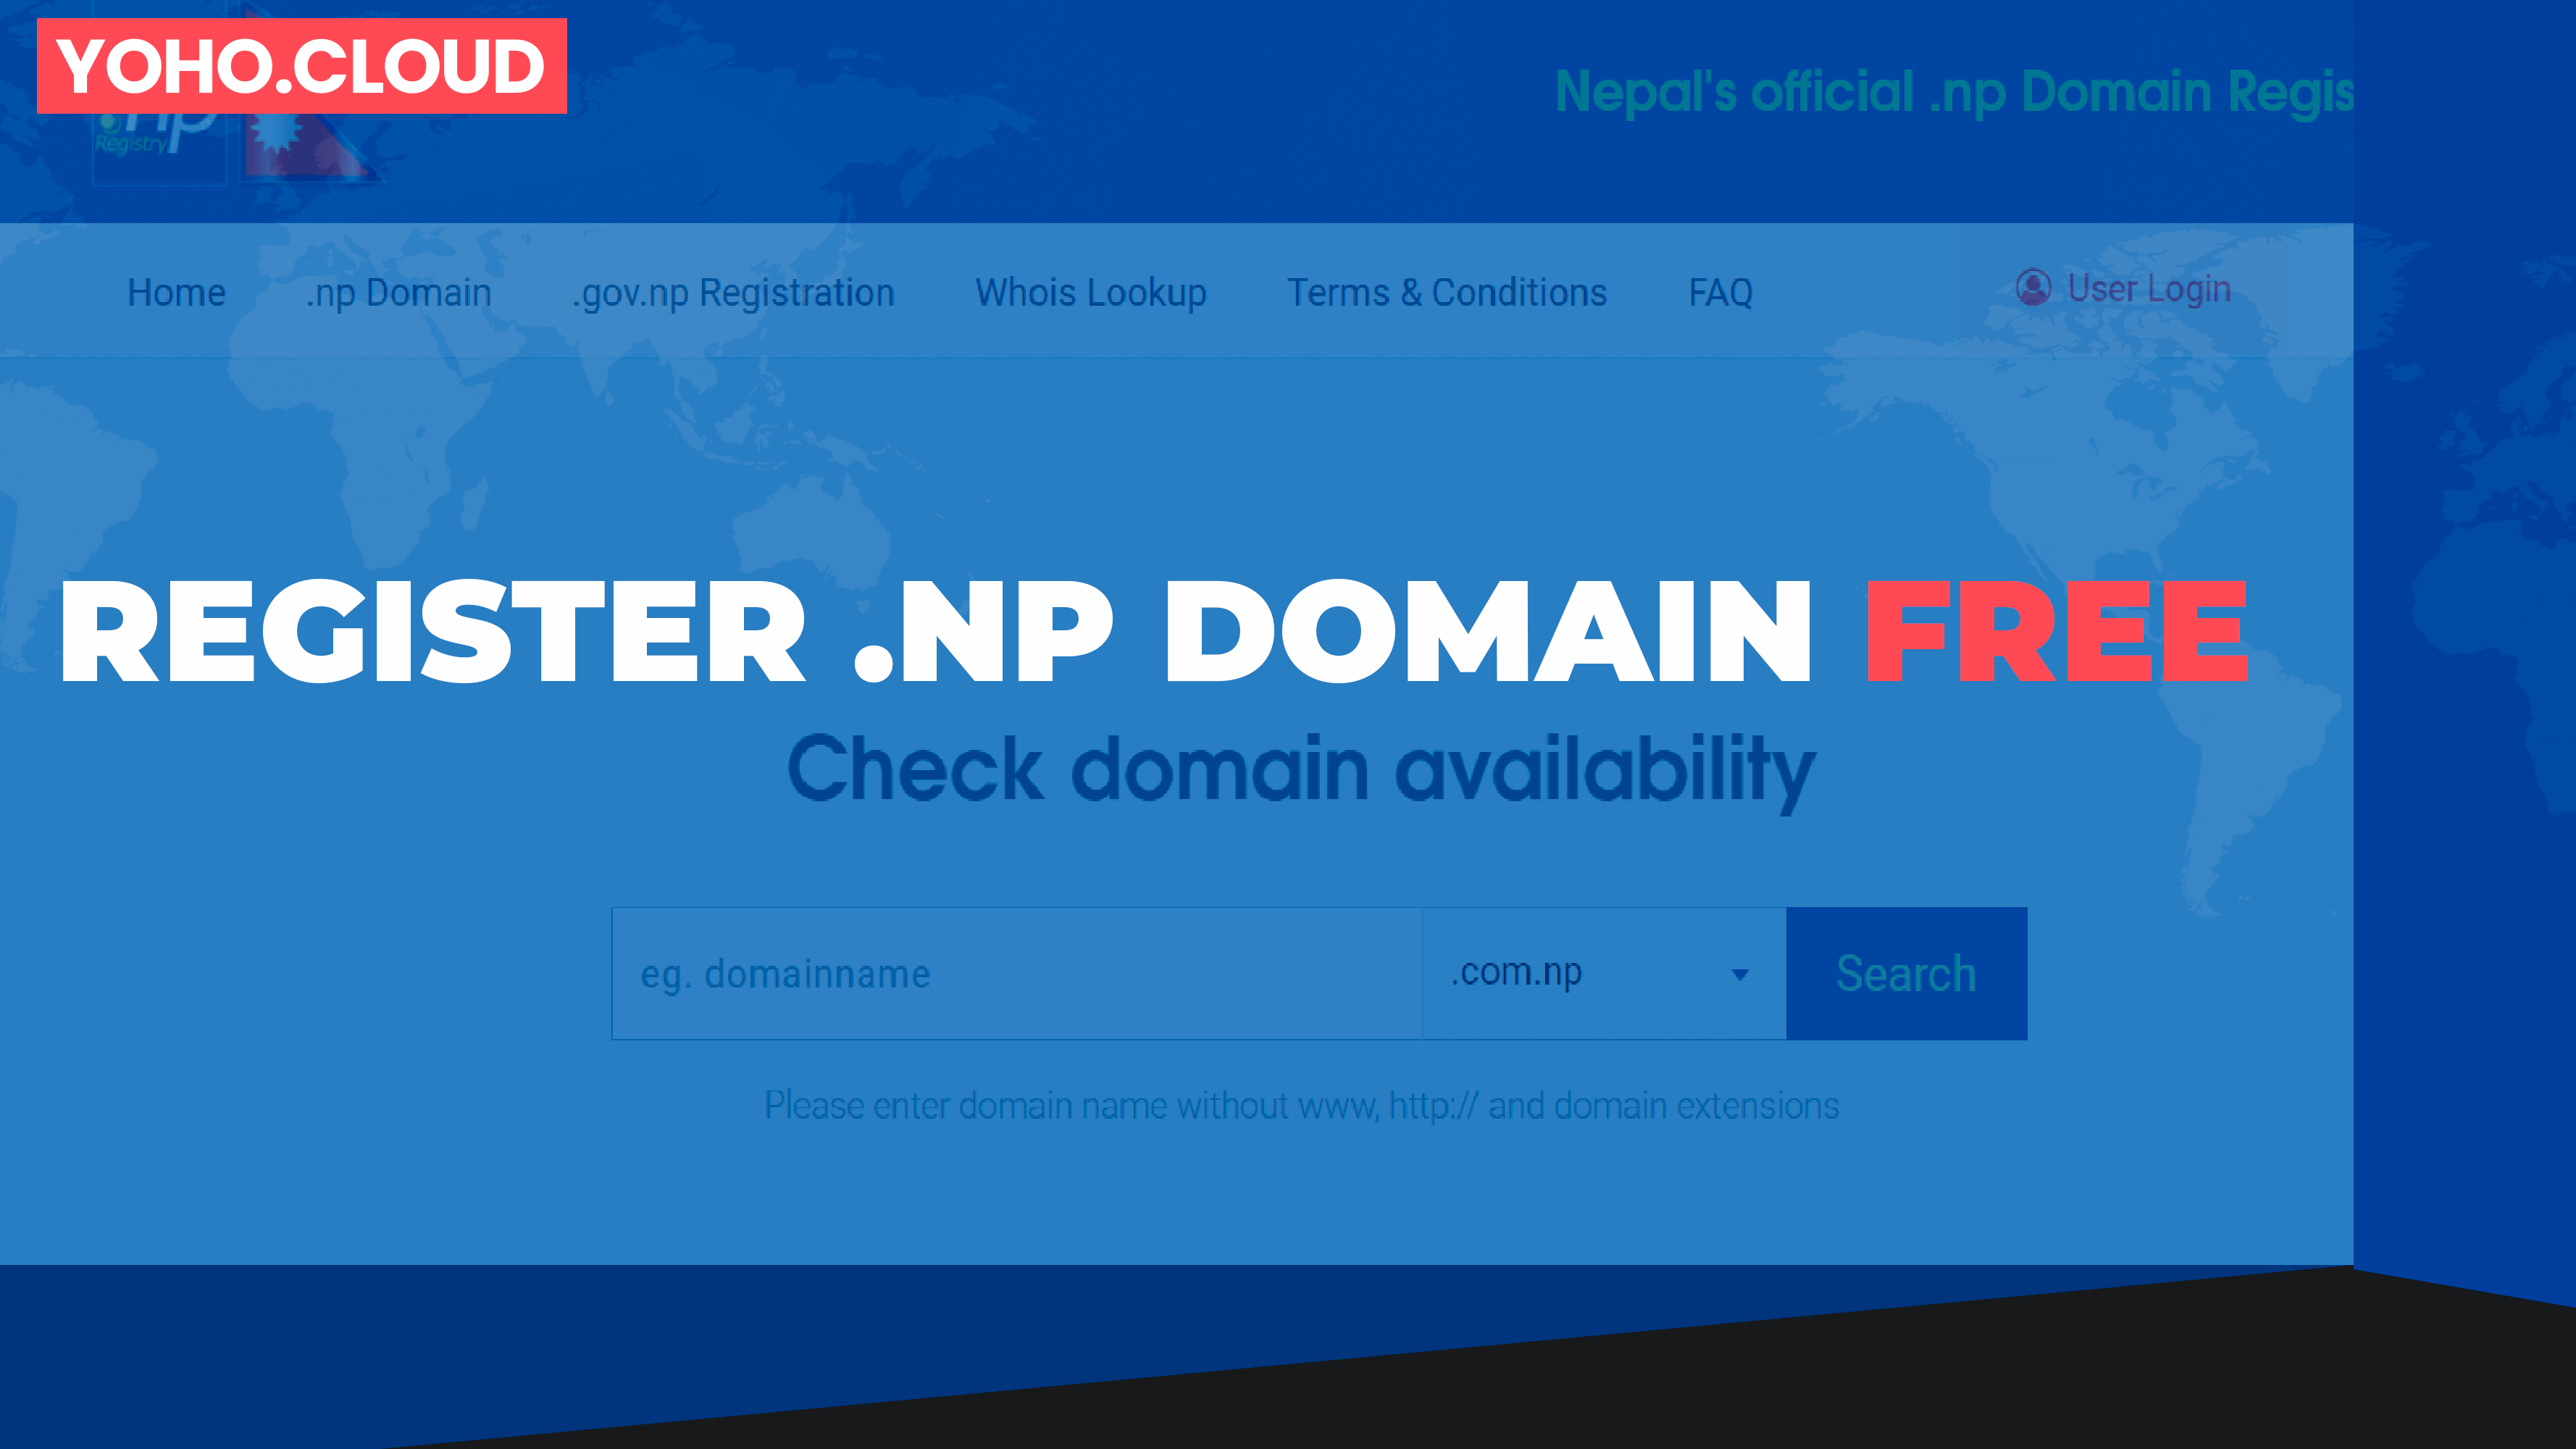 How can I get free .com.np domain in Nepal?